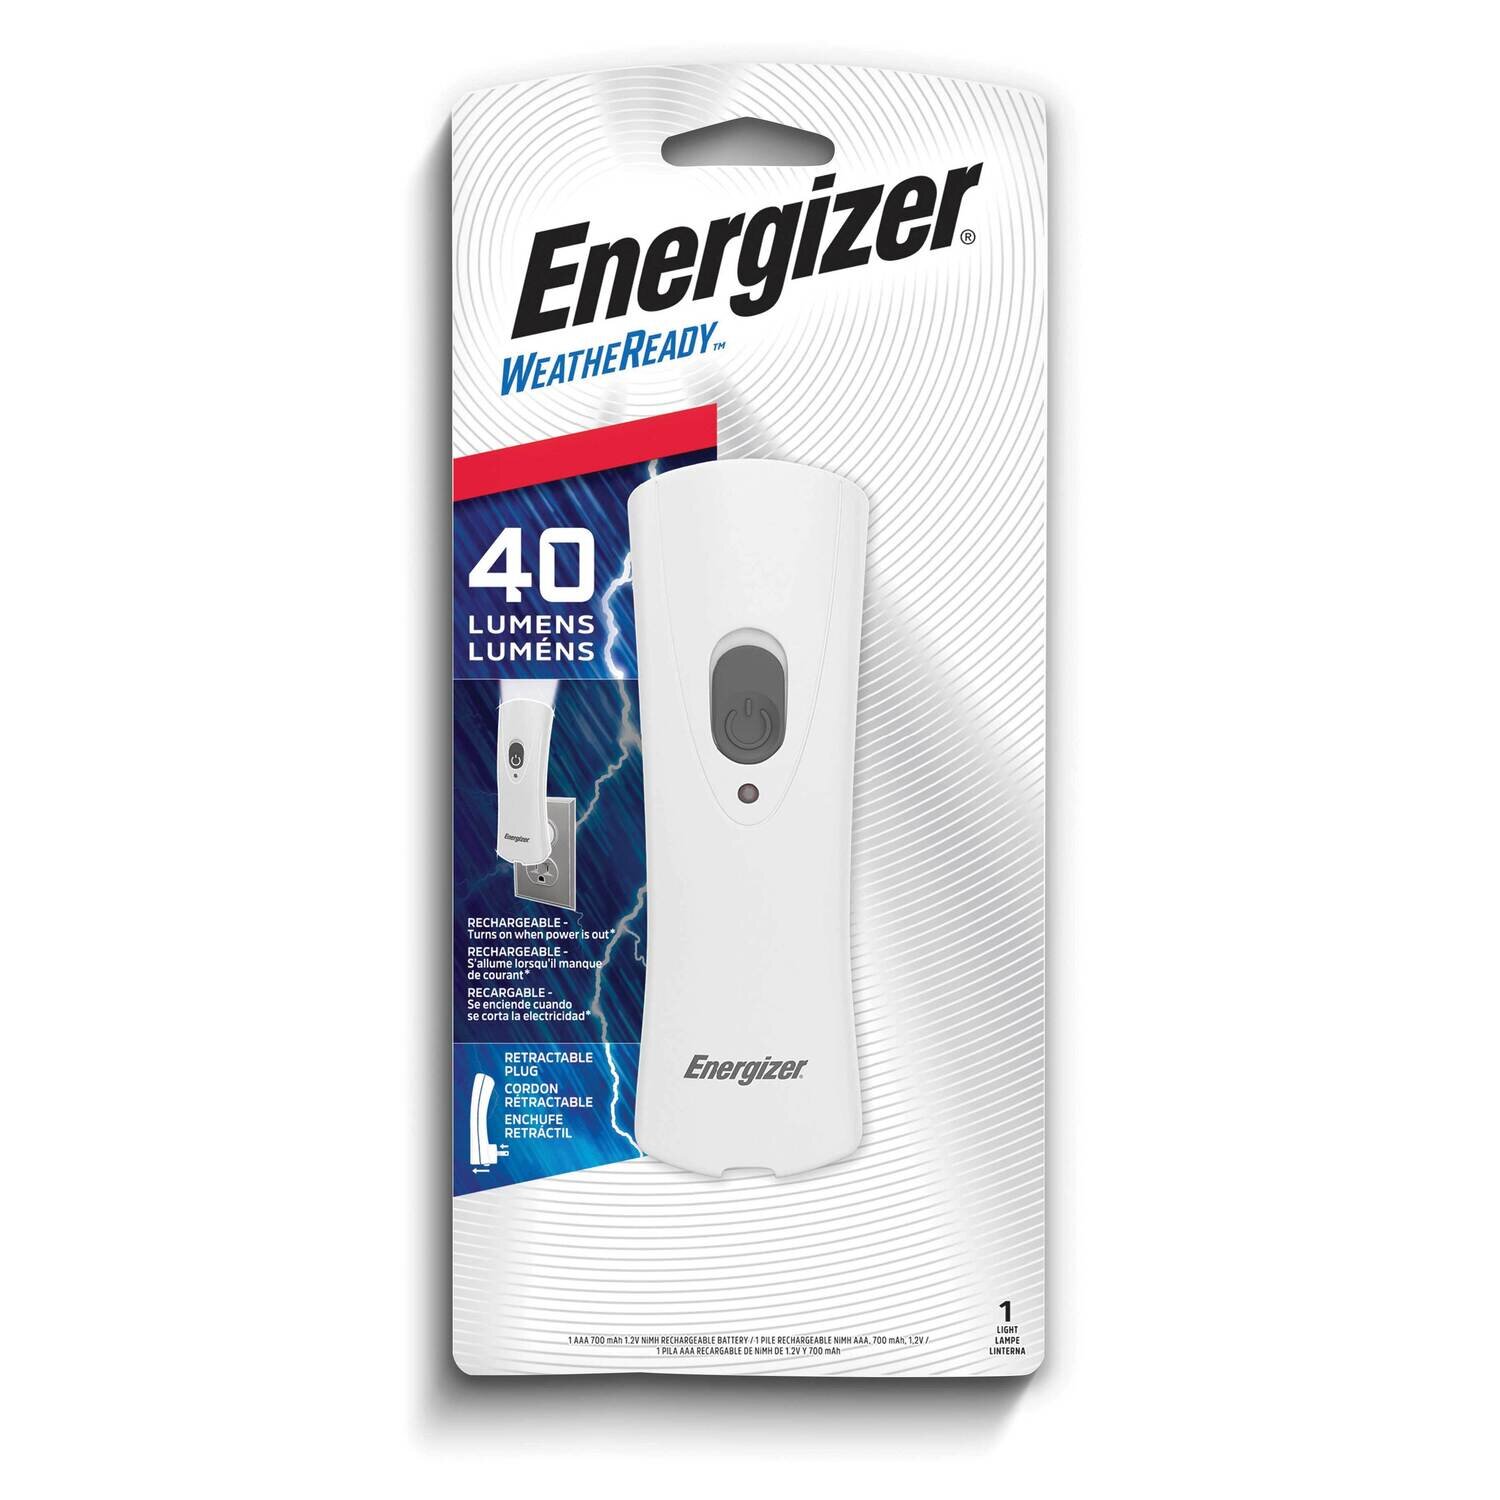 Energizer Weather Ready Rechargeable Compact Handheld LED Flashlight JT5345